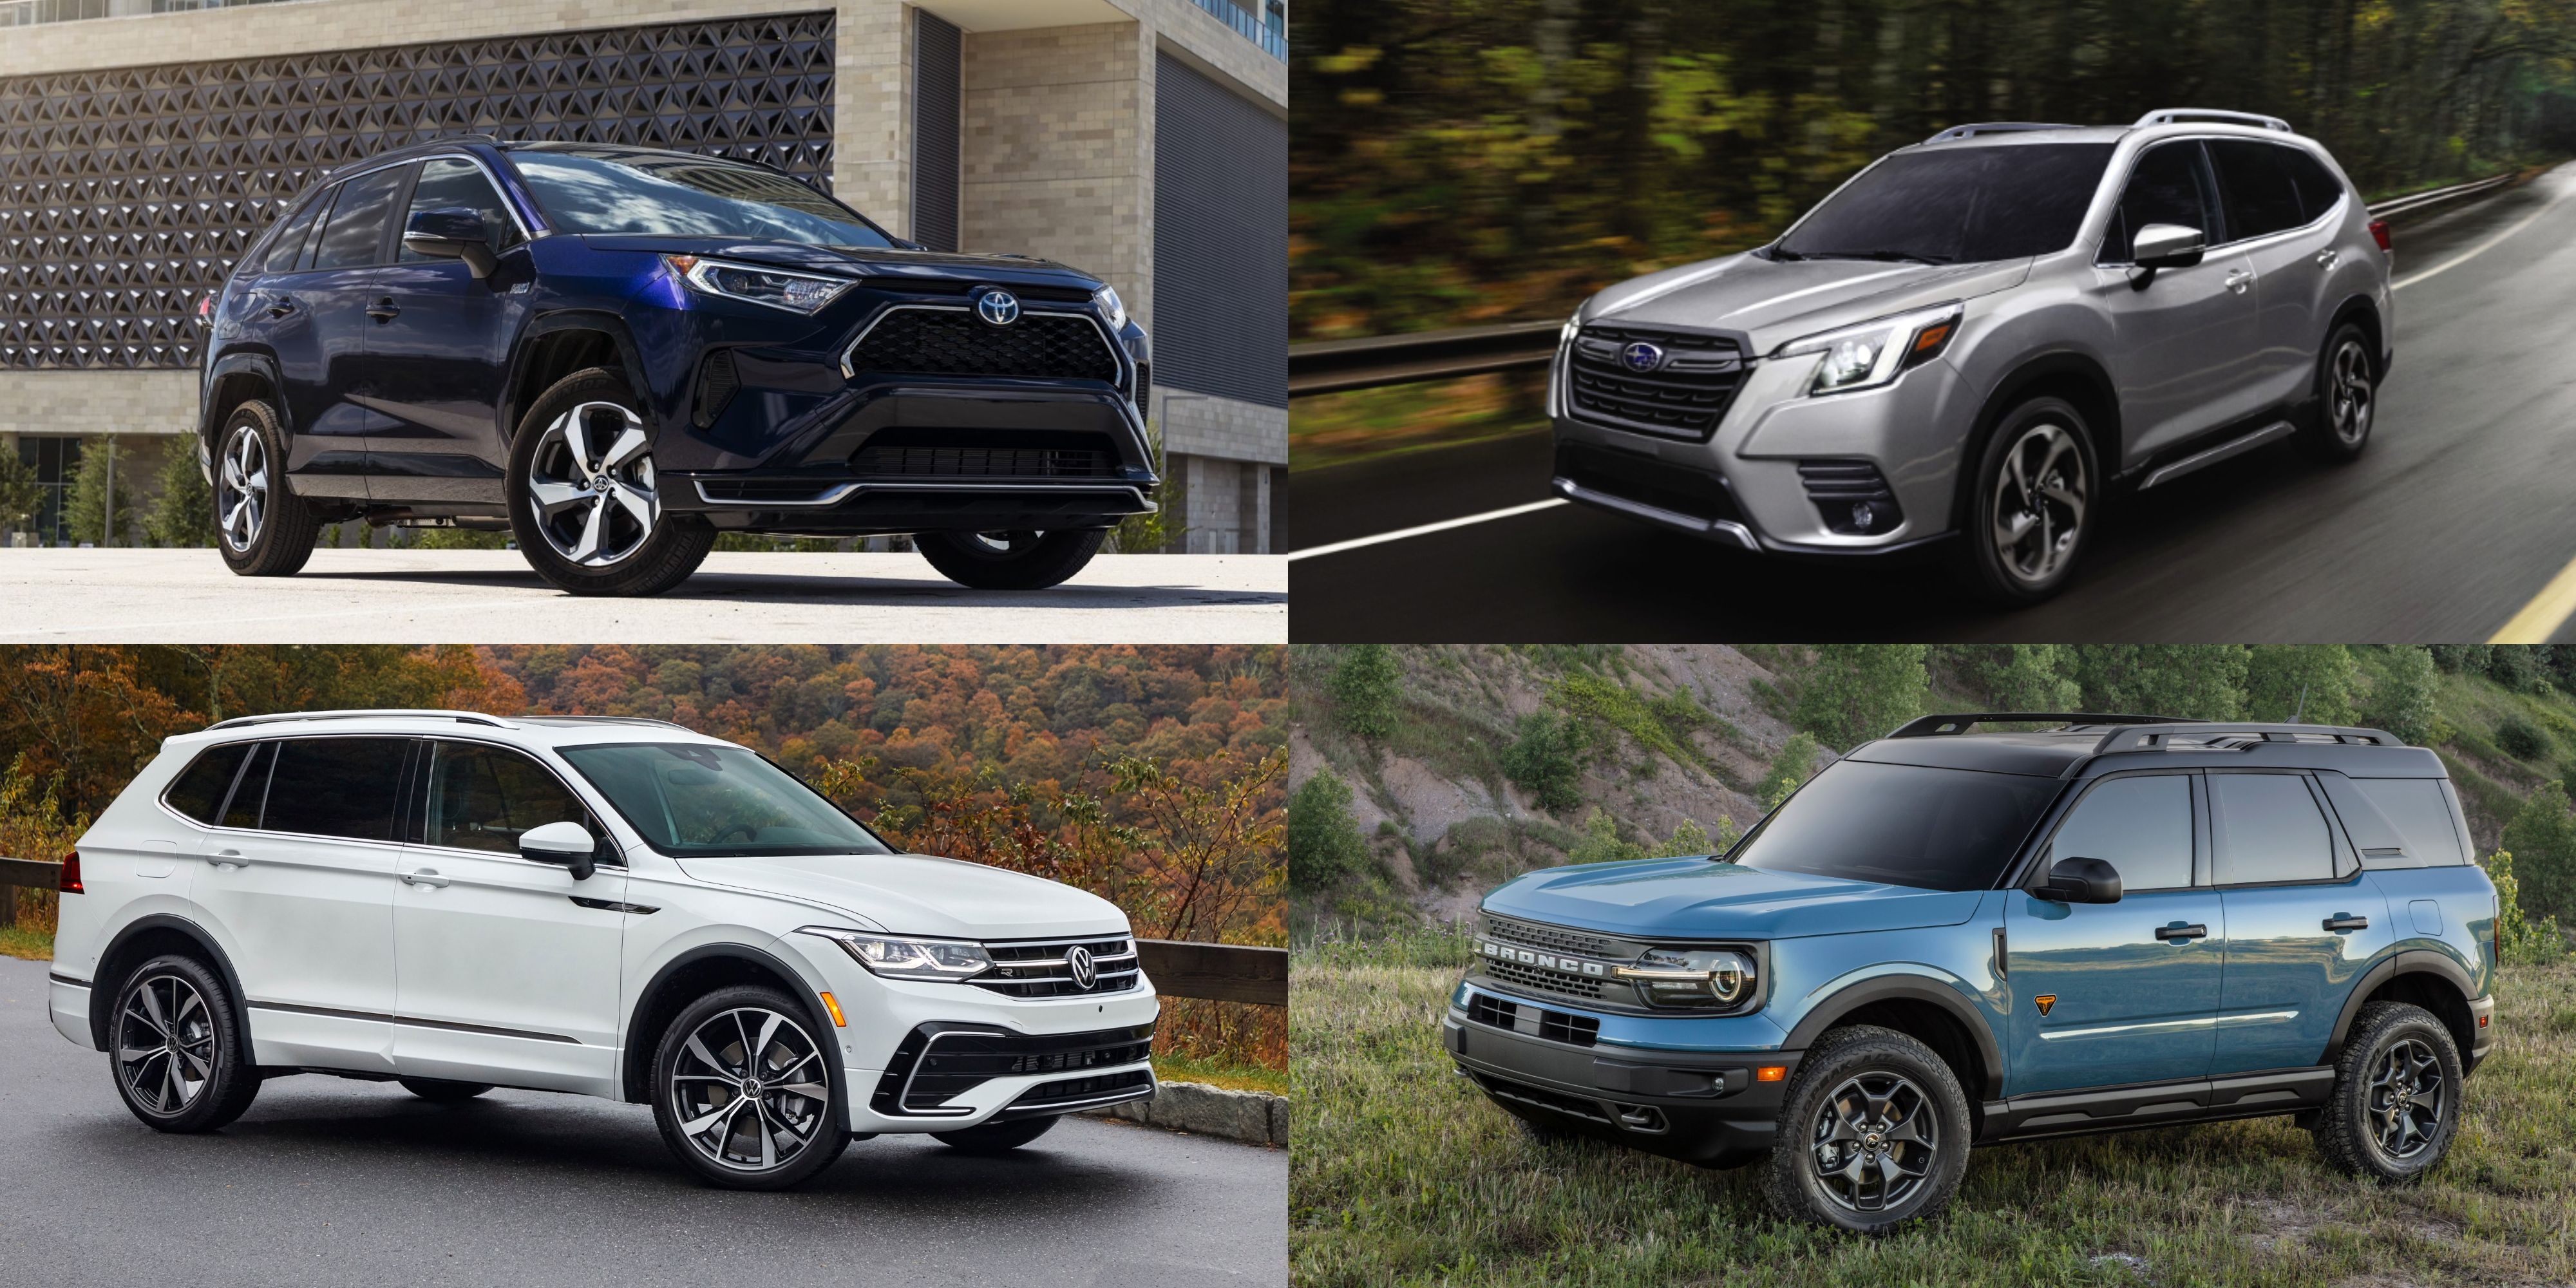 SUVs & Crossovers  Small, Mid-Size & Larger Vehicles With